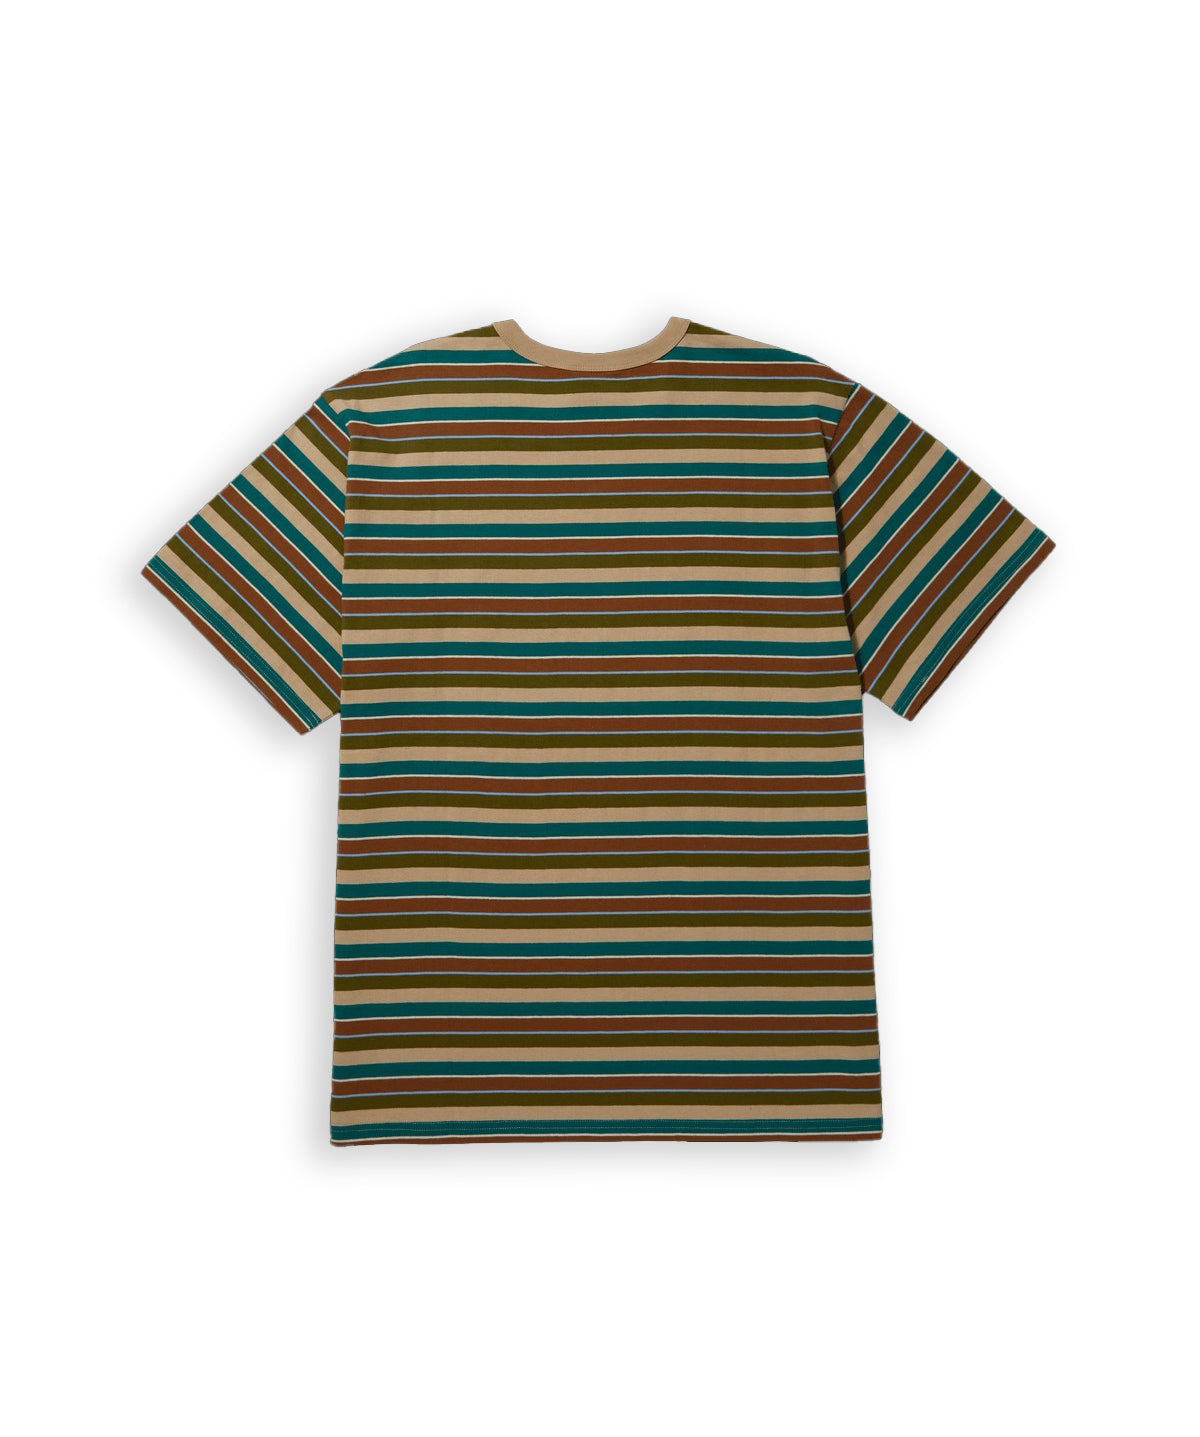 Huf Vernon S/S Relaxed Knit T-Shirt